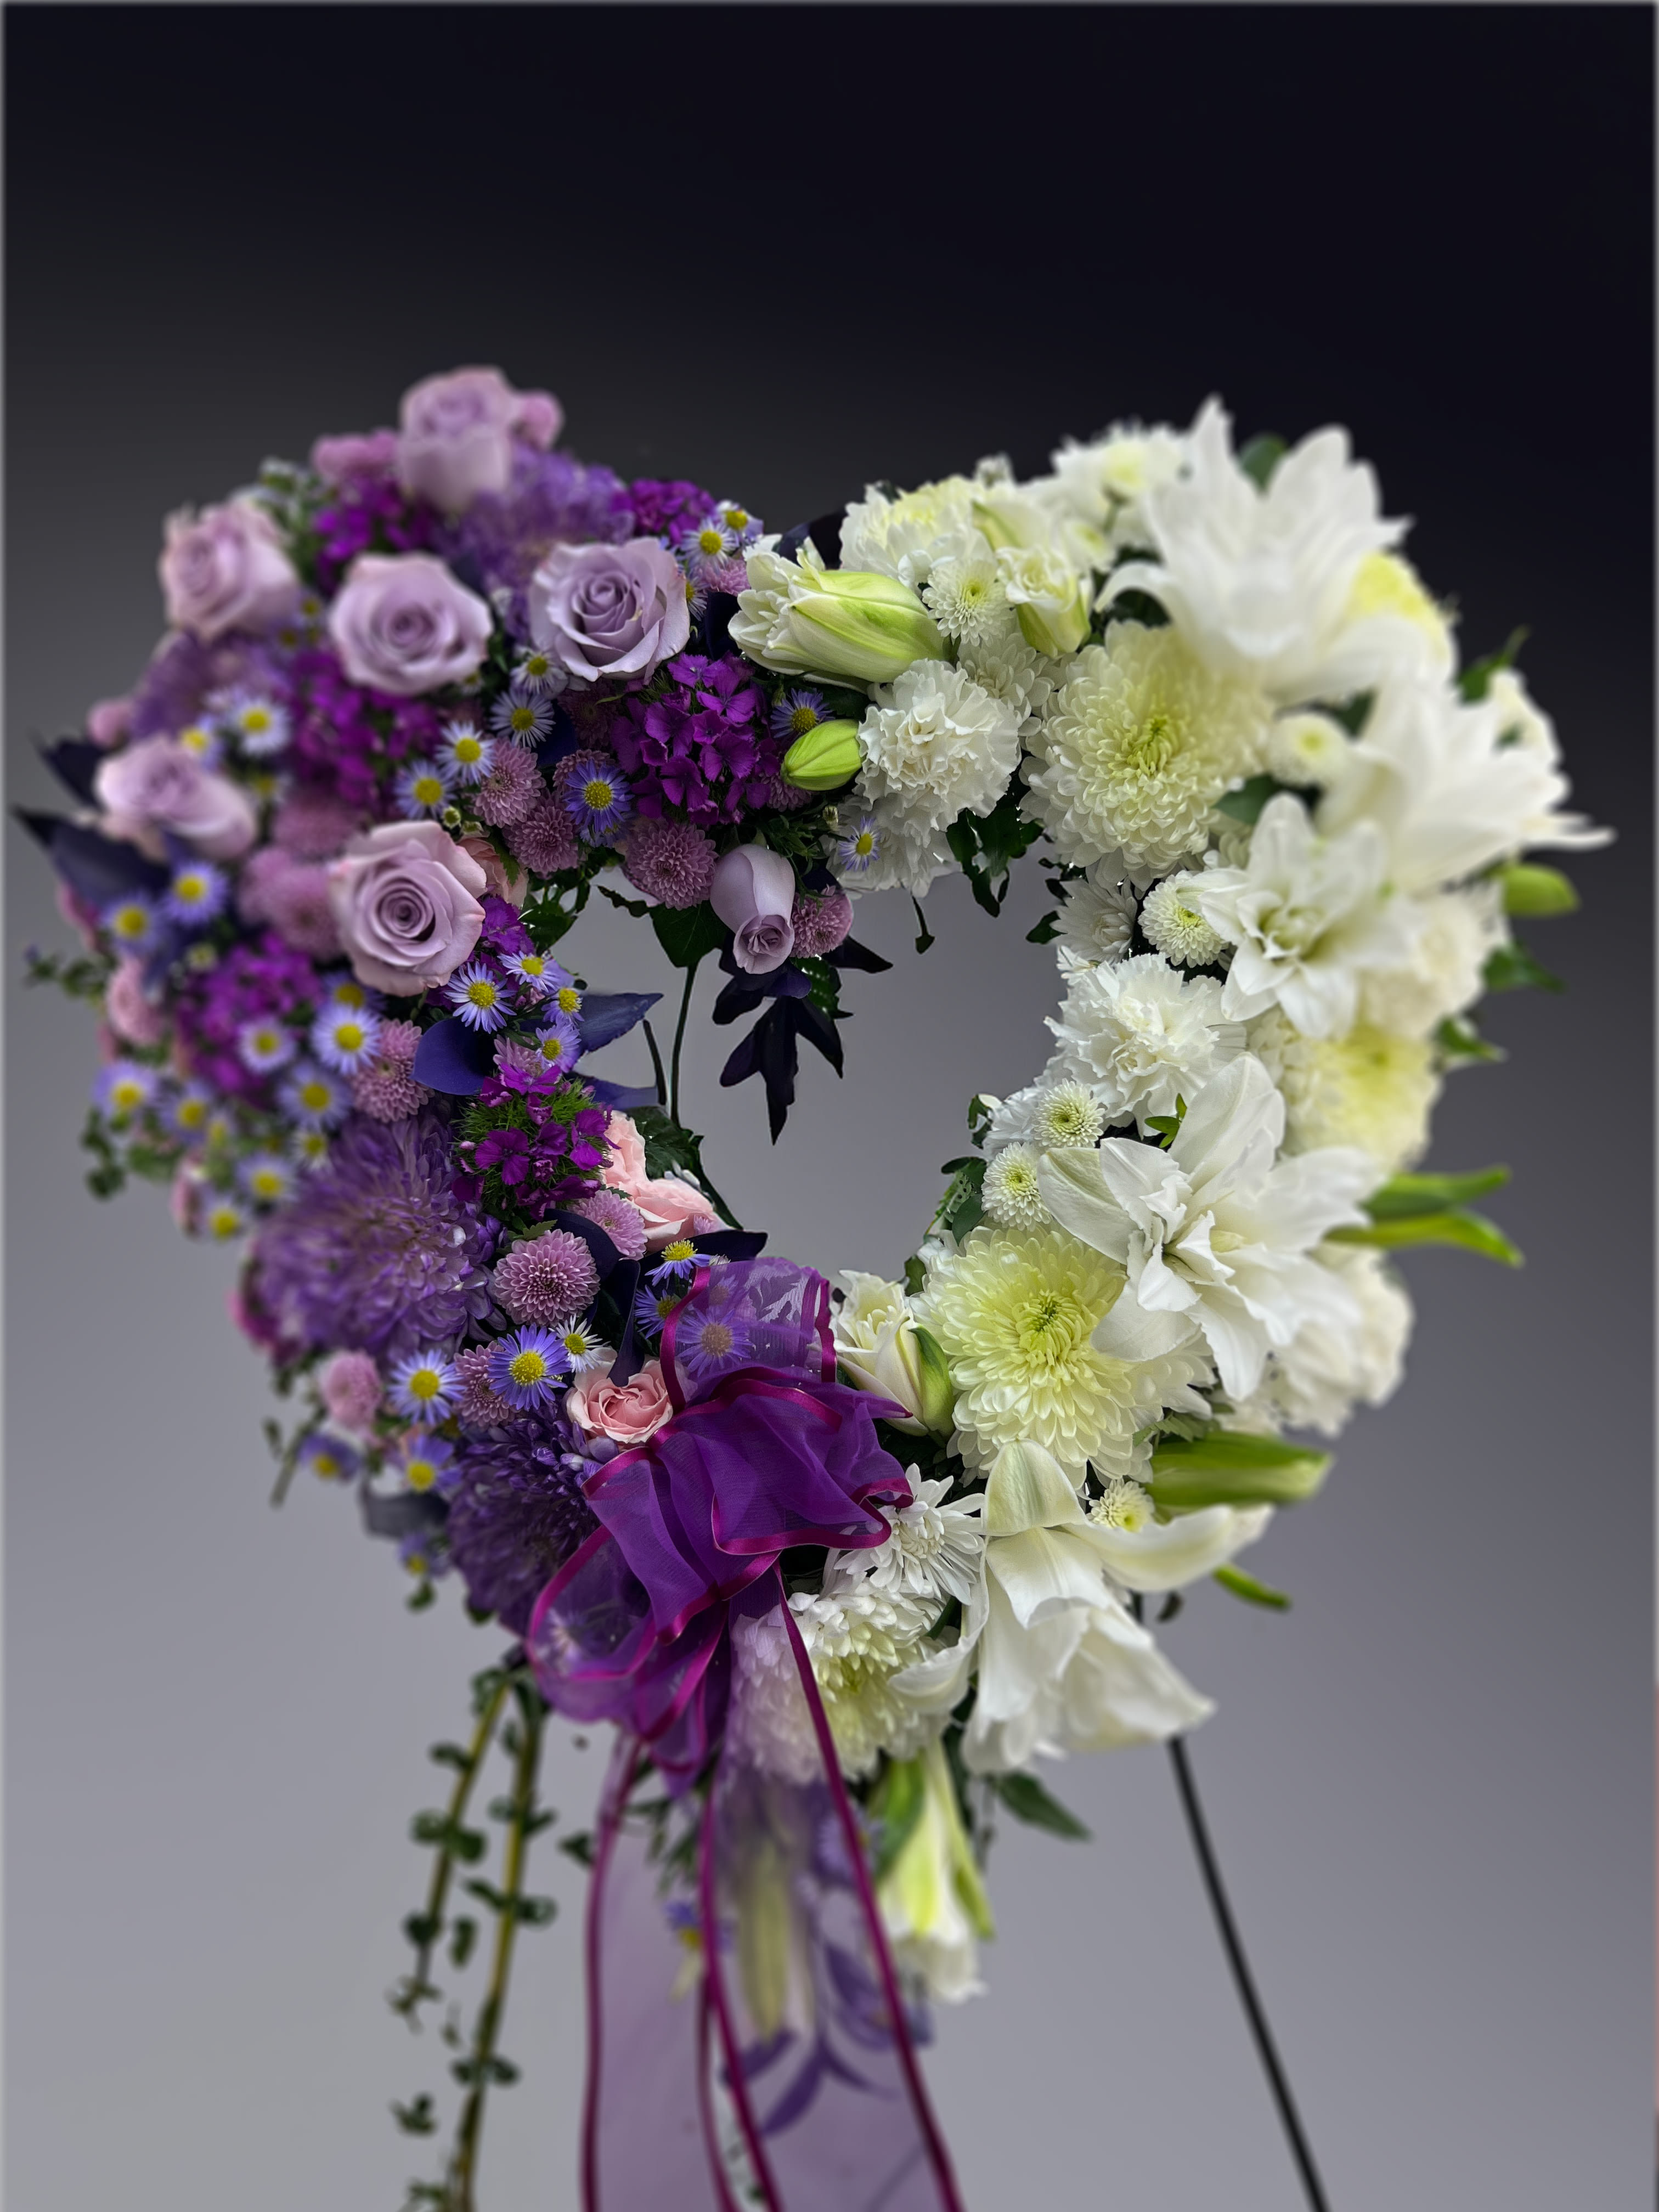 Loving Memory Heart  - When words aren't enough to express your sympathy and love, this open heart spray of purples and whites conveys your condolences thoughtfully. It is crafted of beautiful purple roses and white mums.  Colors and assortment may vary. The heart measures approximately 20” H x 20&quot;L without easel.